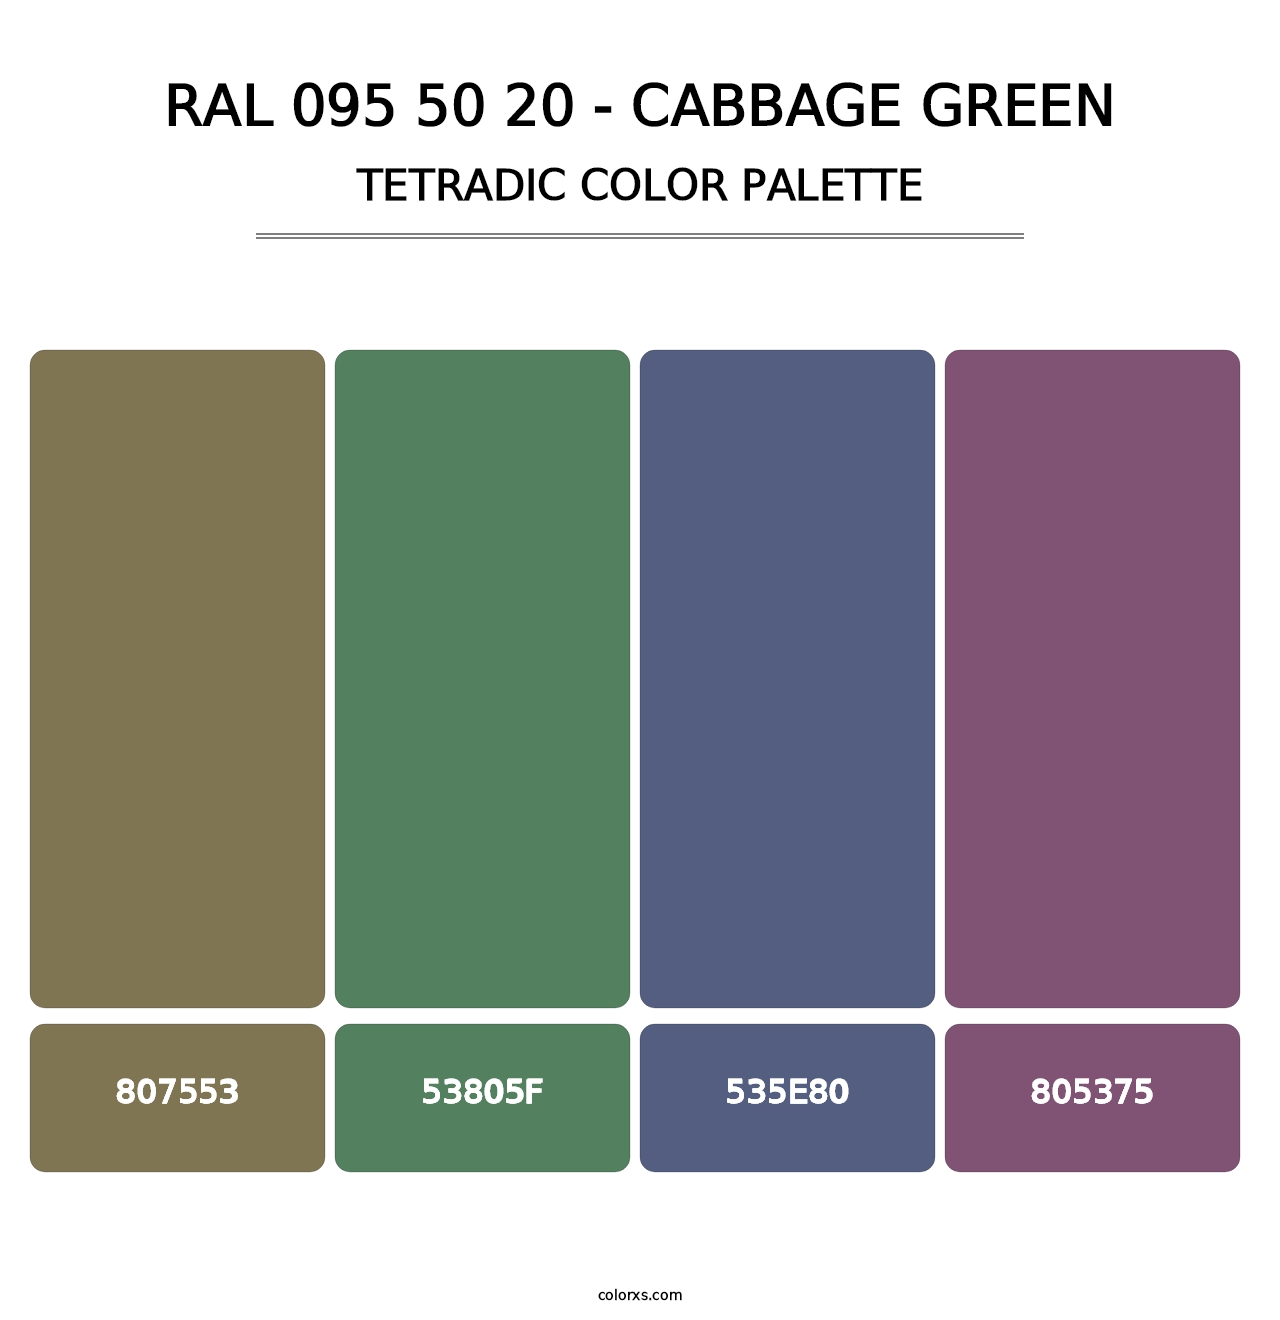 RAL 095 50 20 - Cabbage Green - Tetradic Color Palette